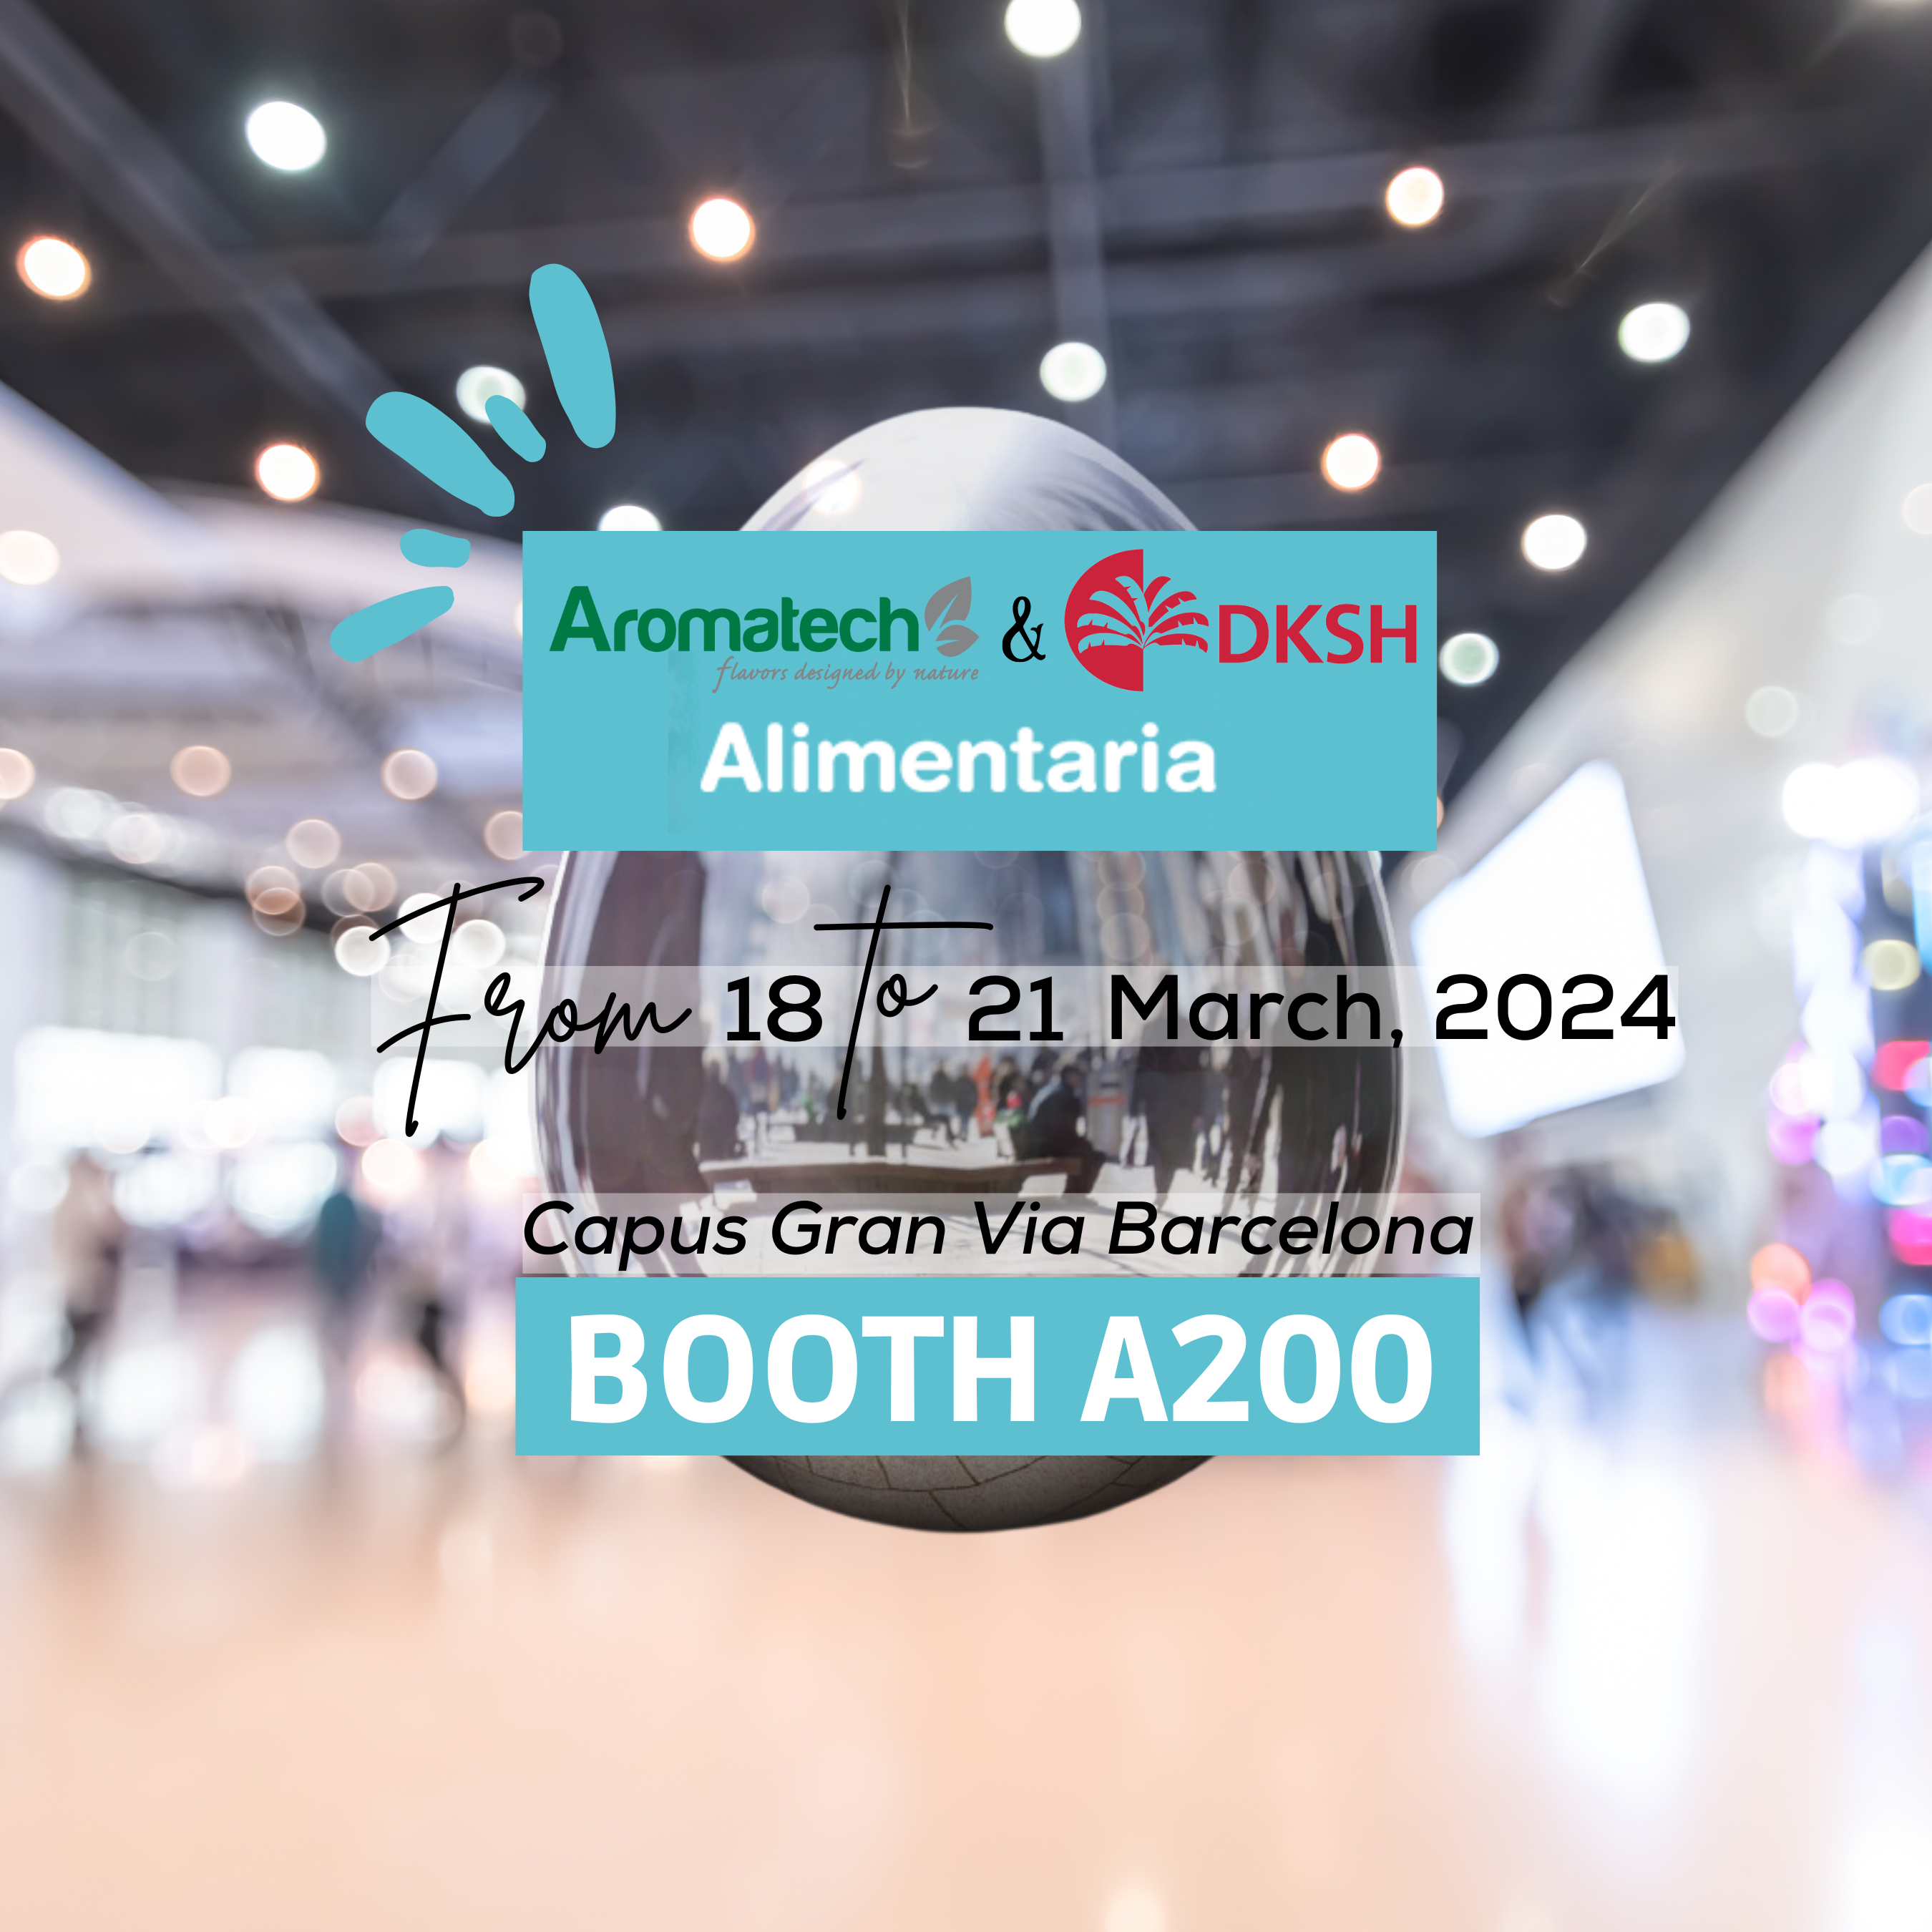 Aromatech will be at Alimentaria 2024 show in Barcelona